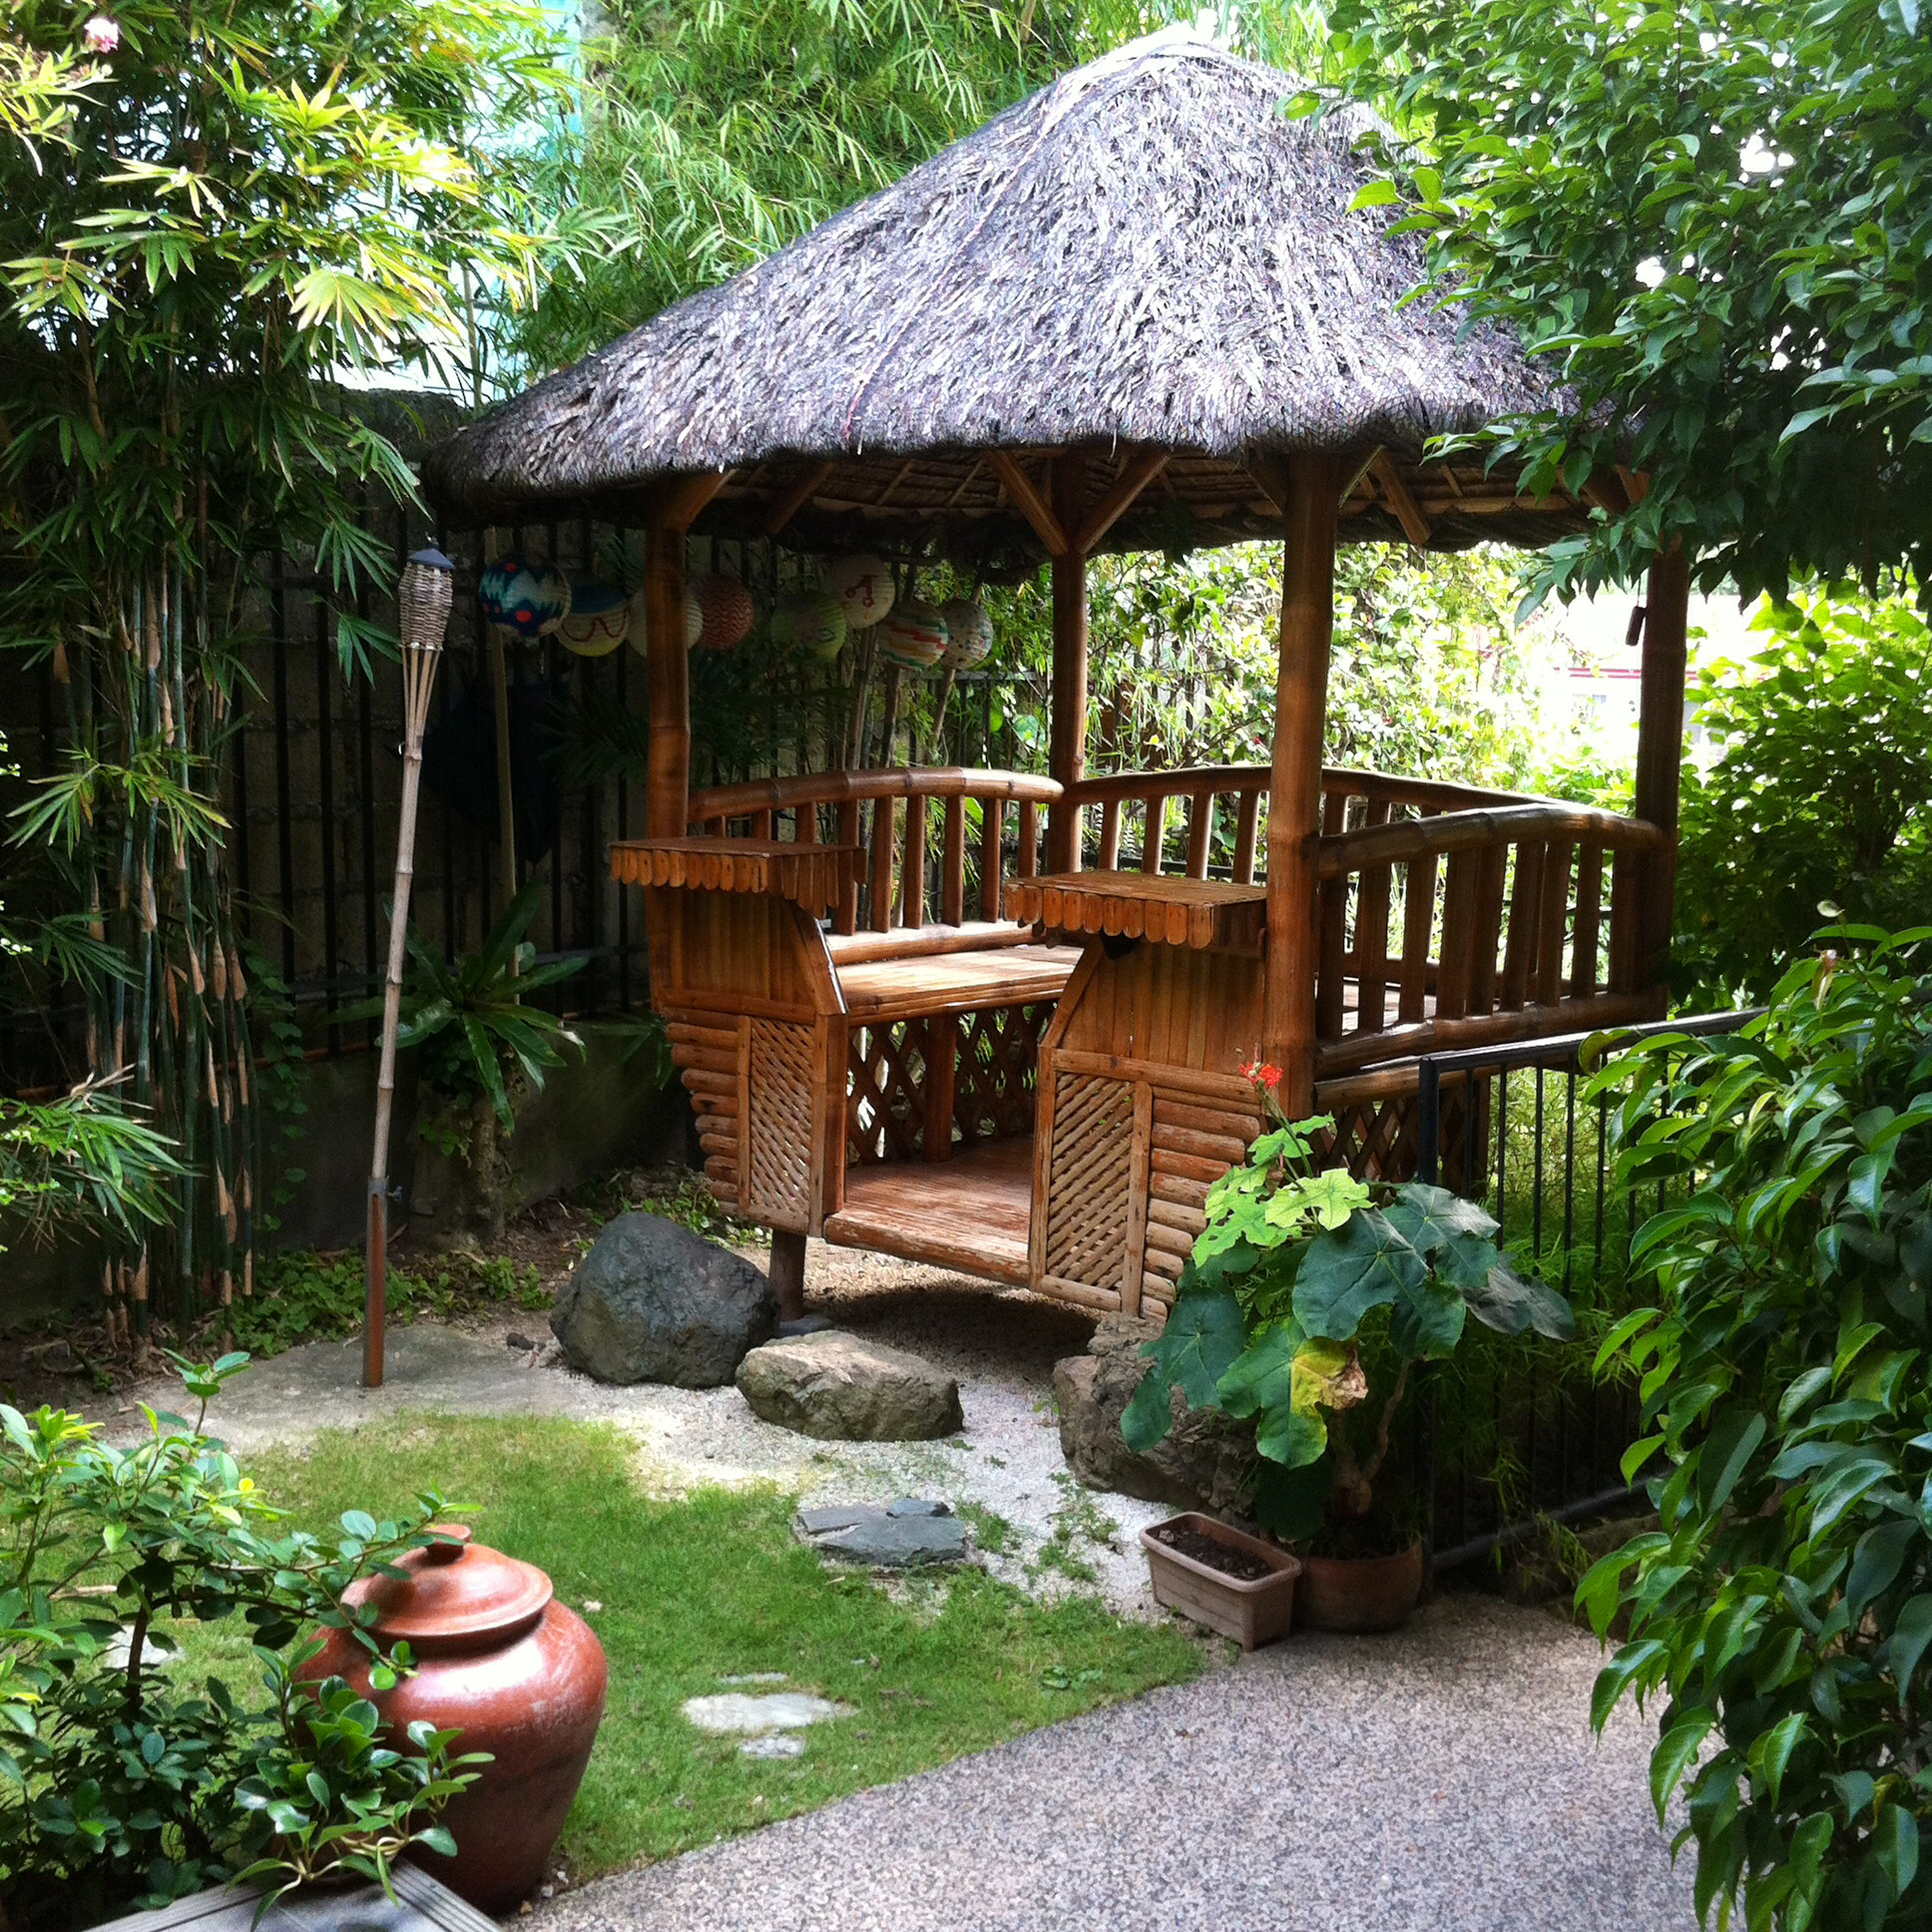 Our nipa hut in the garden. Love chillin' in there | House design ...